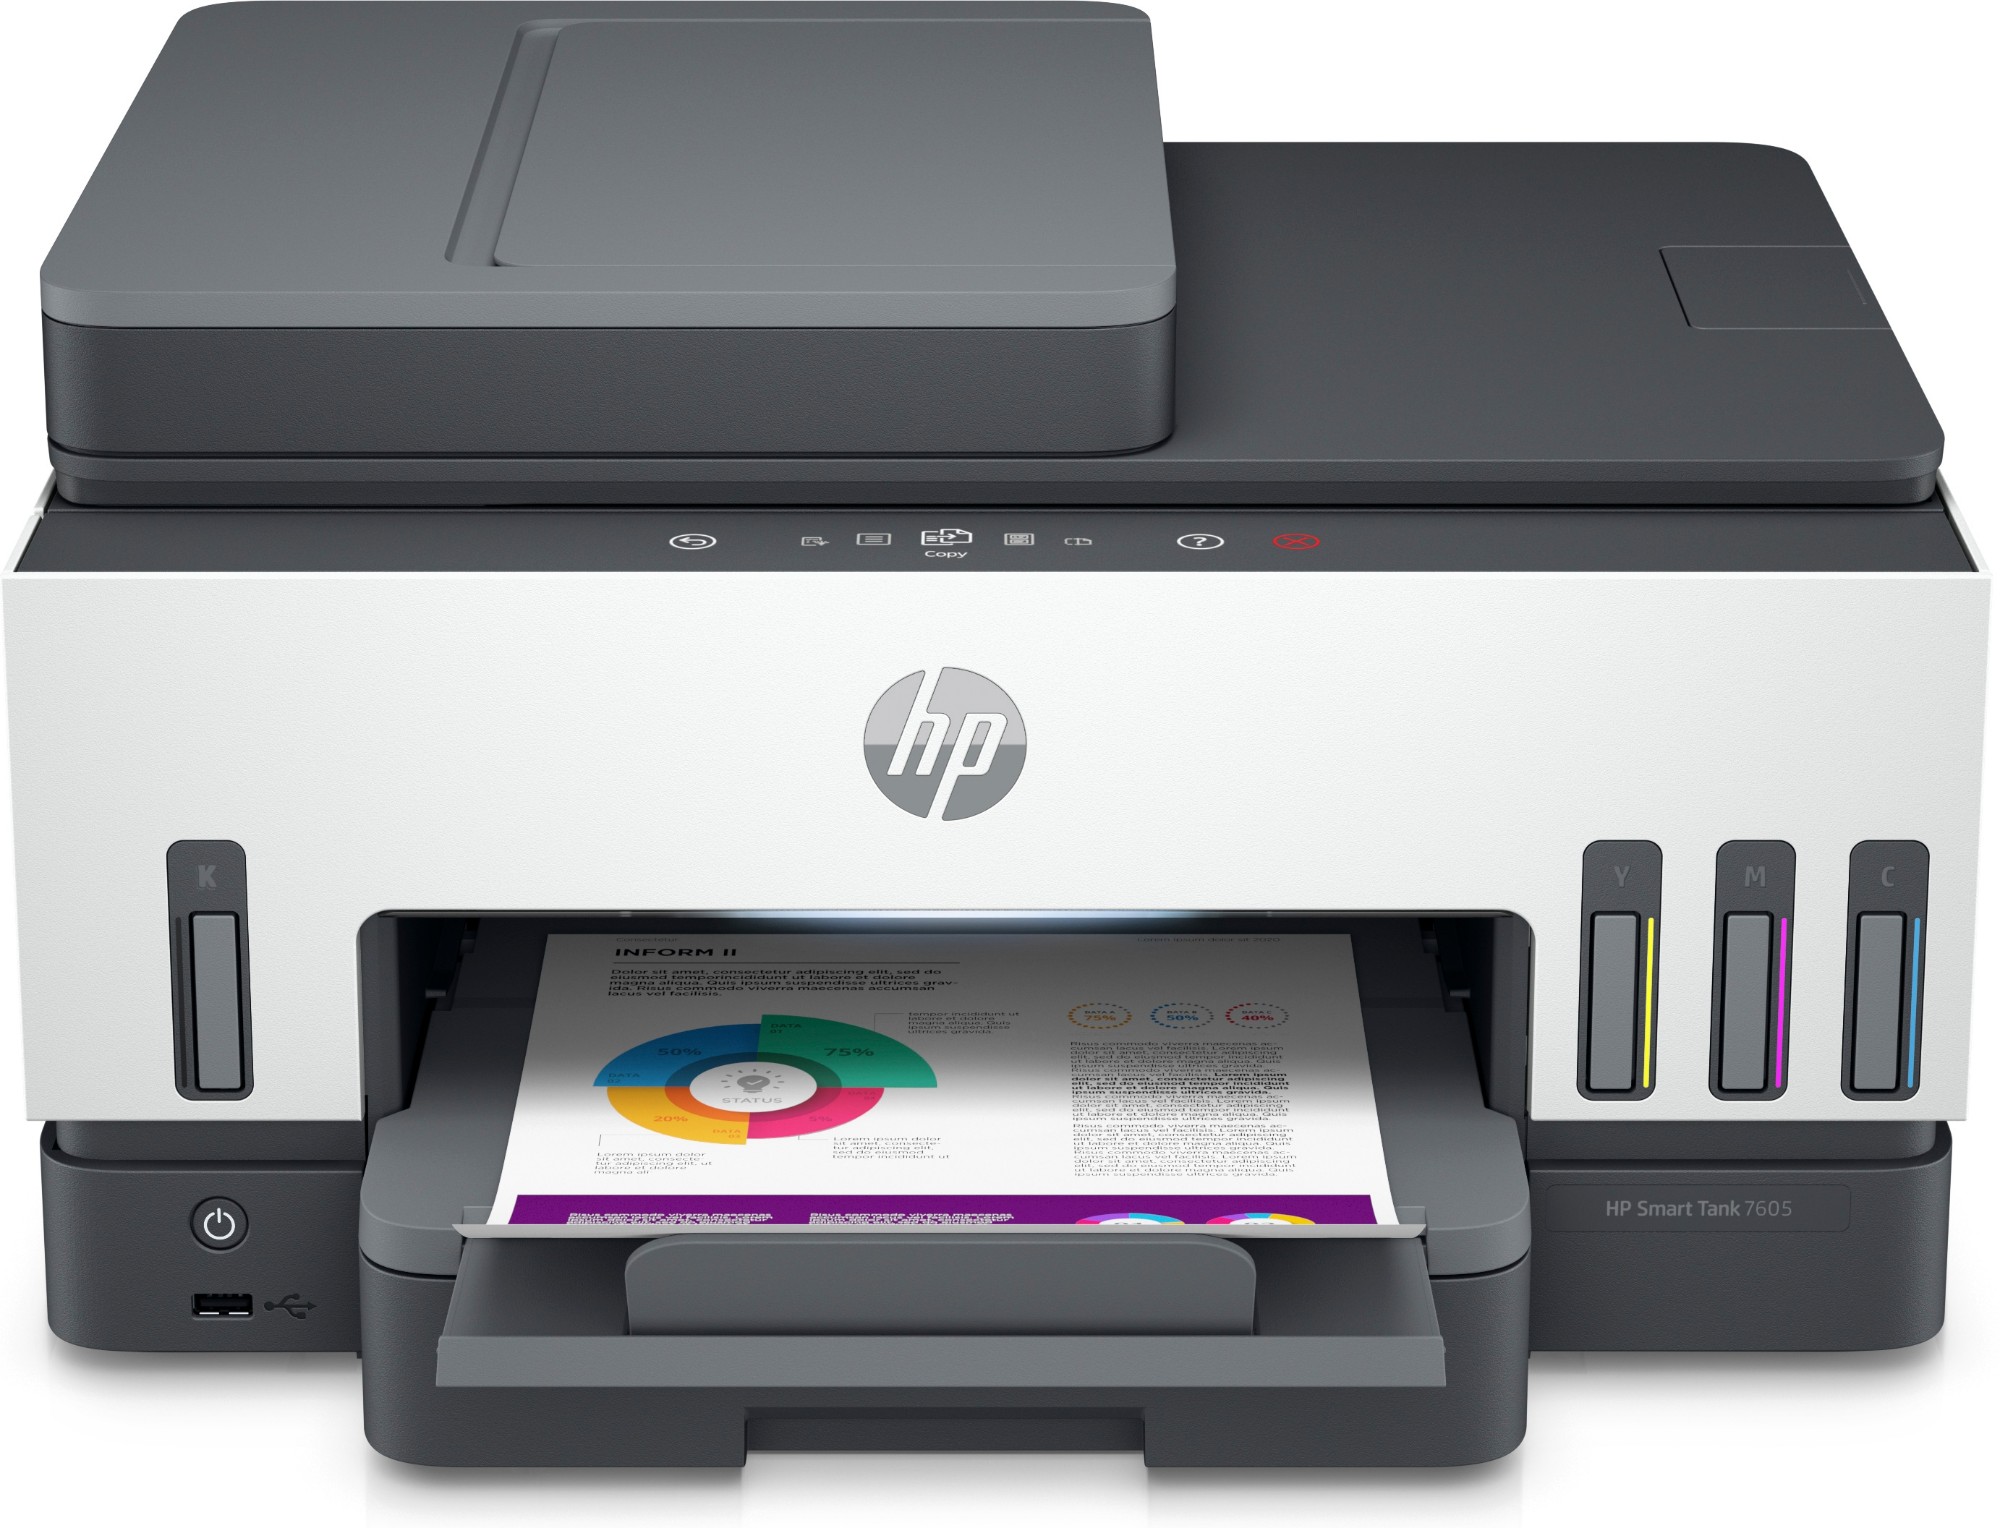 HP Smart Tank 7605 All-in-One, Colour, Printer for Home and home office, Print, Copy, Scan, Fax, ADF and Wireless, 35-sheet ADF; Scan to PDF; Two-sided printing